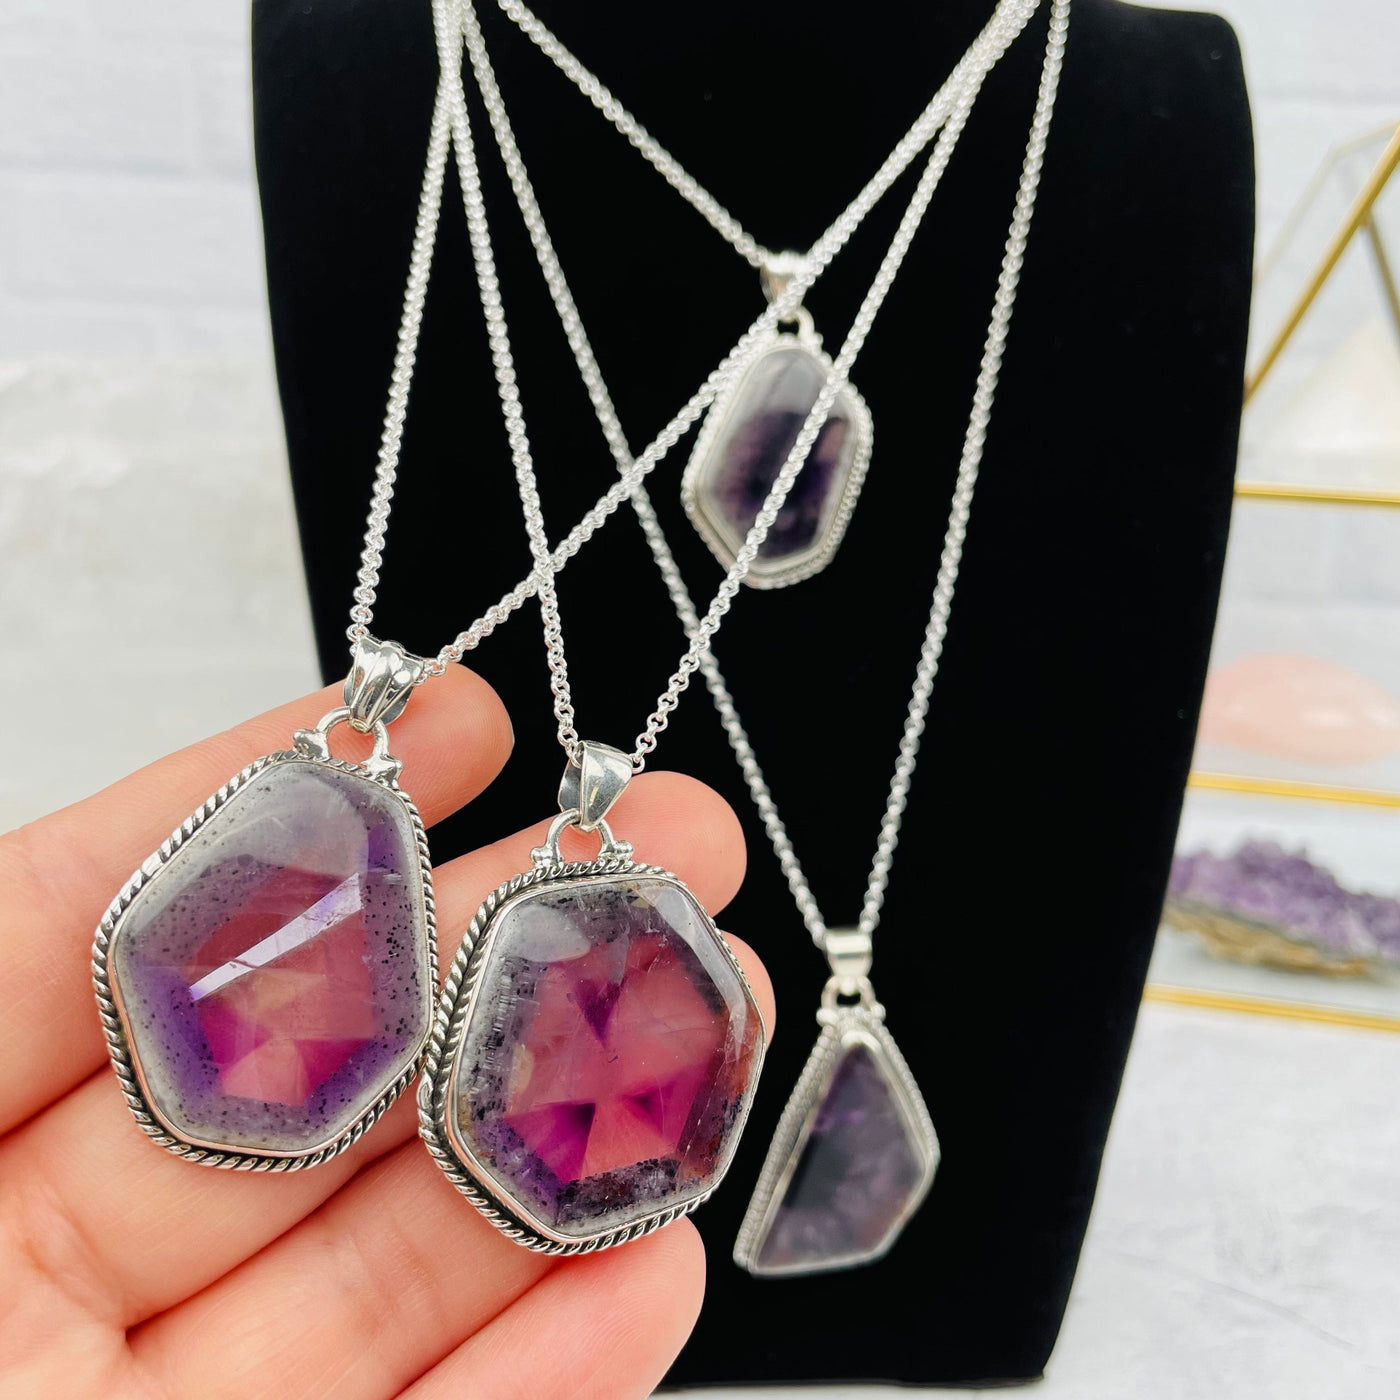 Trapiche Amethyst with Matrix Necklace in hand for size reference 